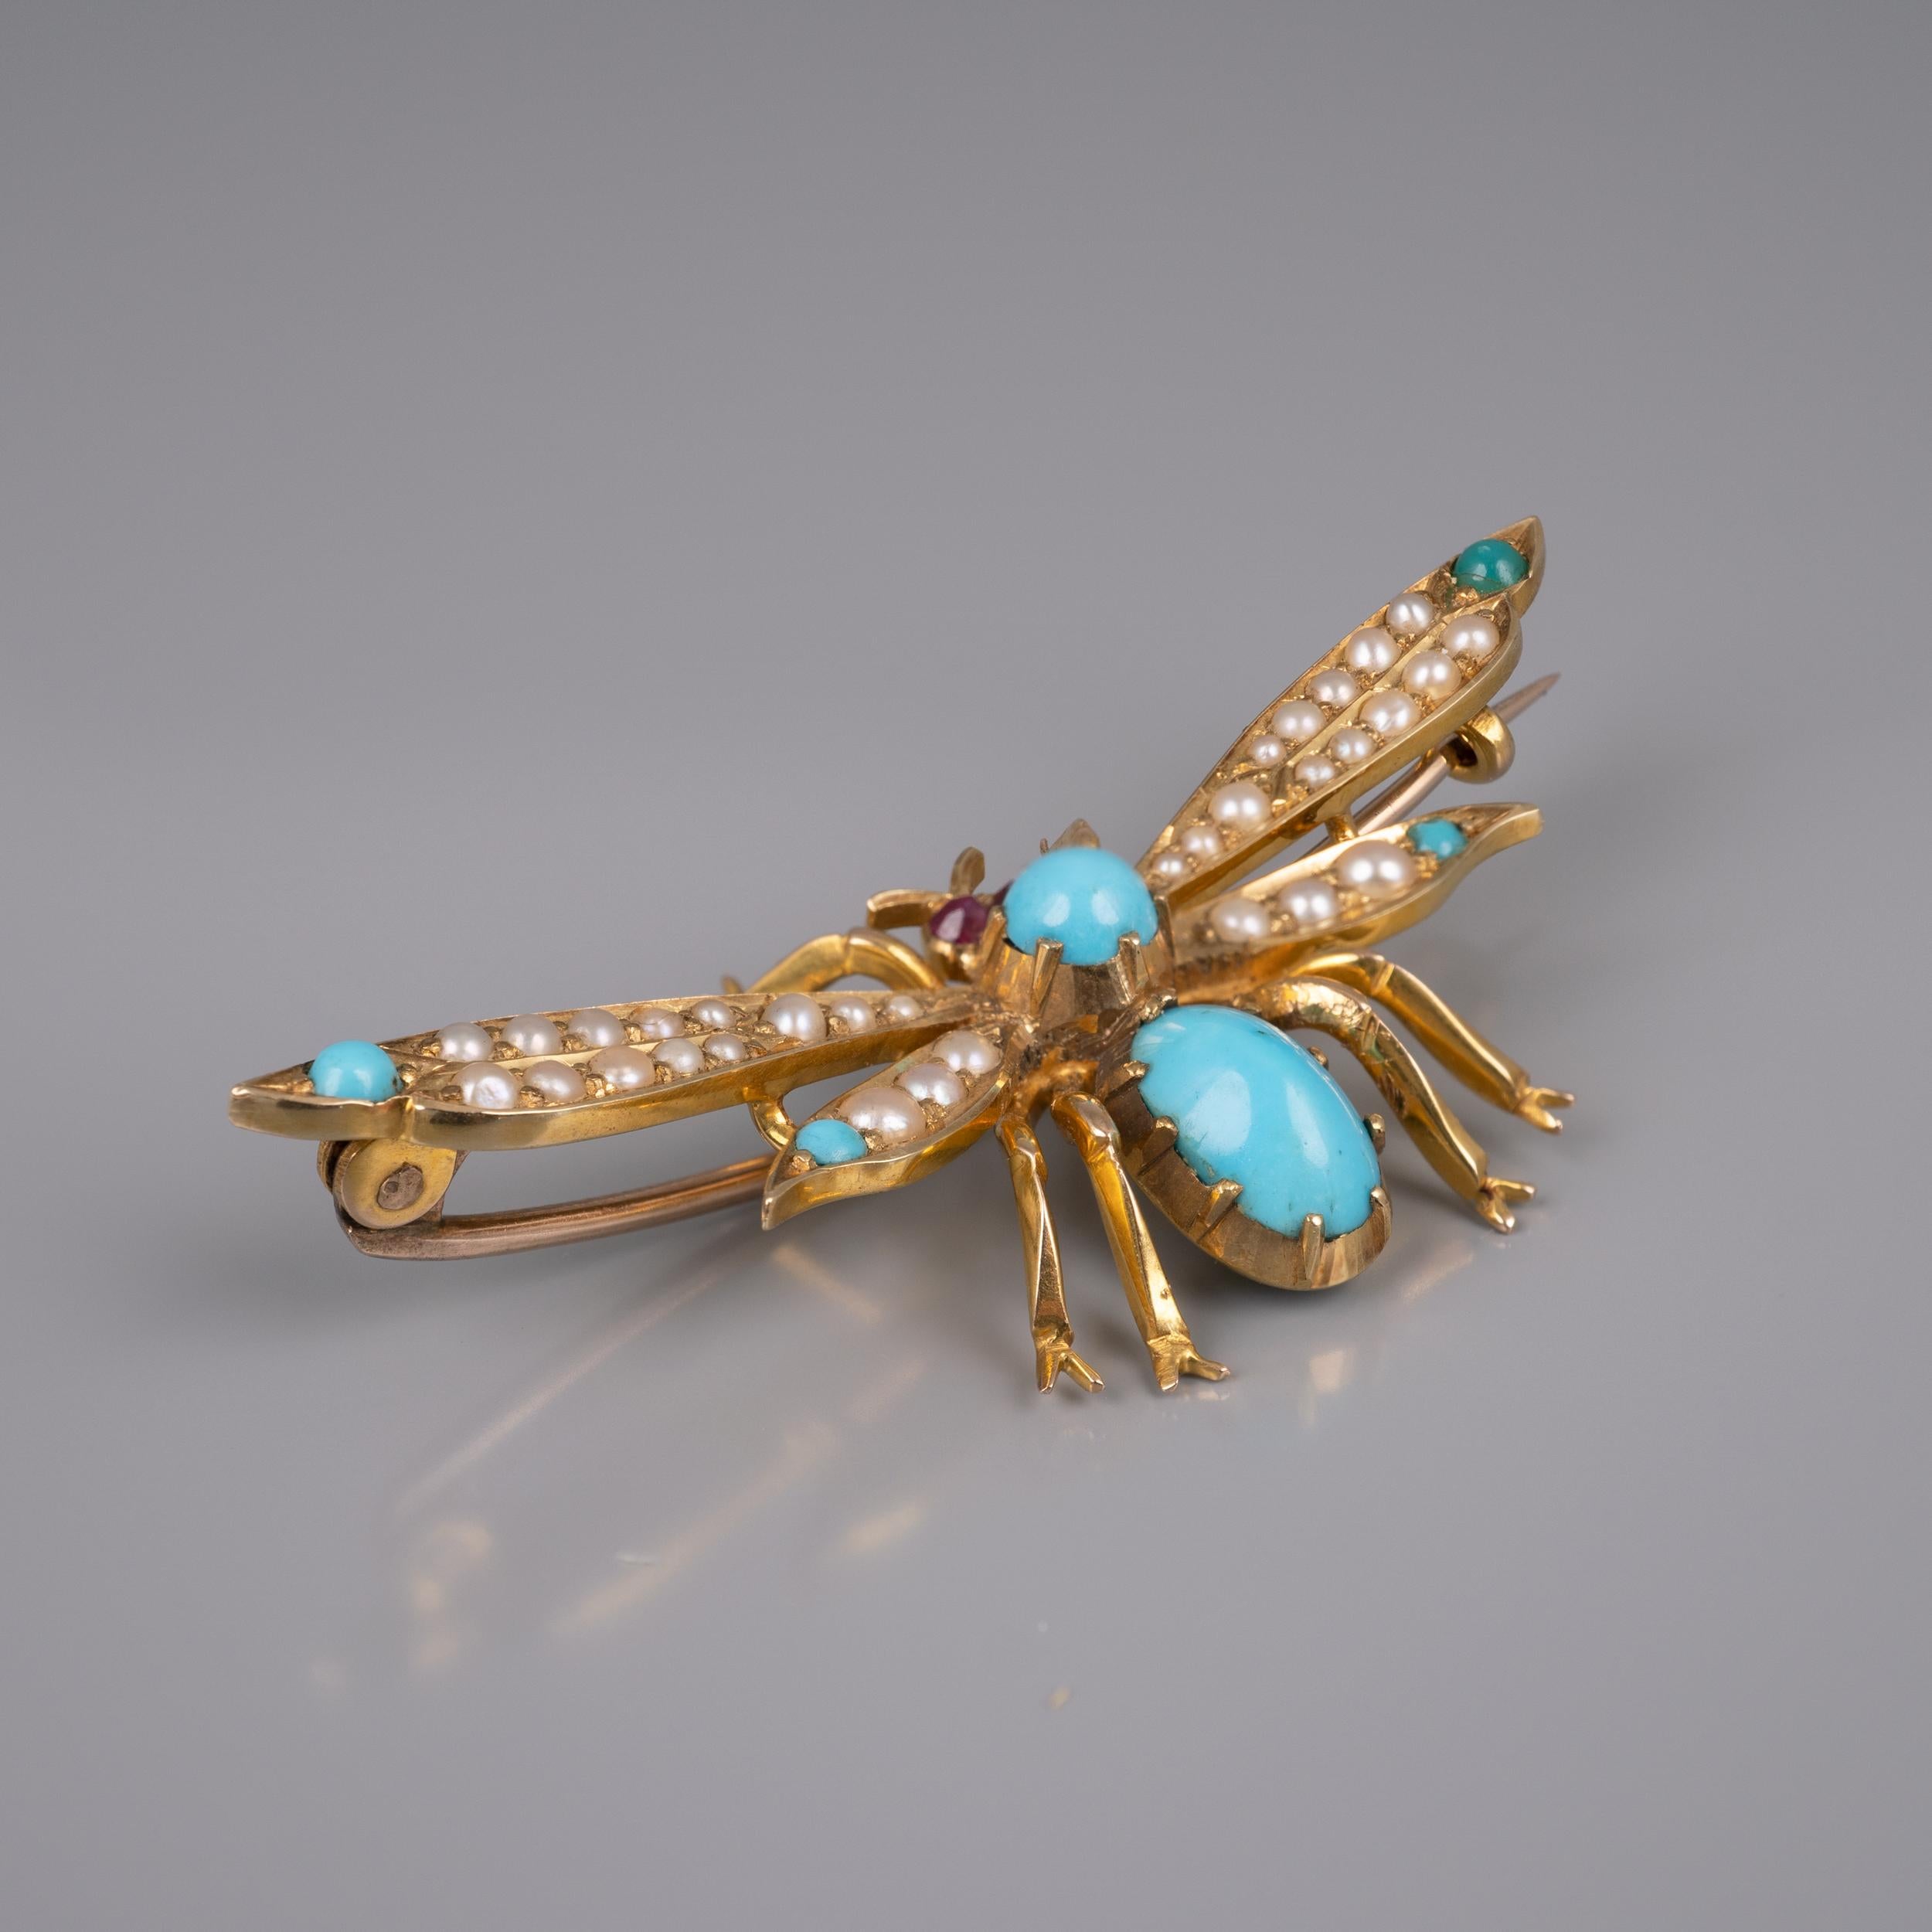 Cabochon Antique 15 Karat Gold Turquoise Pearl Ruby Winged Insect Brooch, circa 1910 For Sale